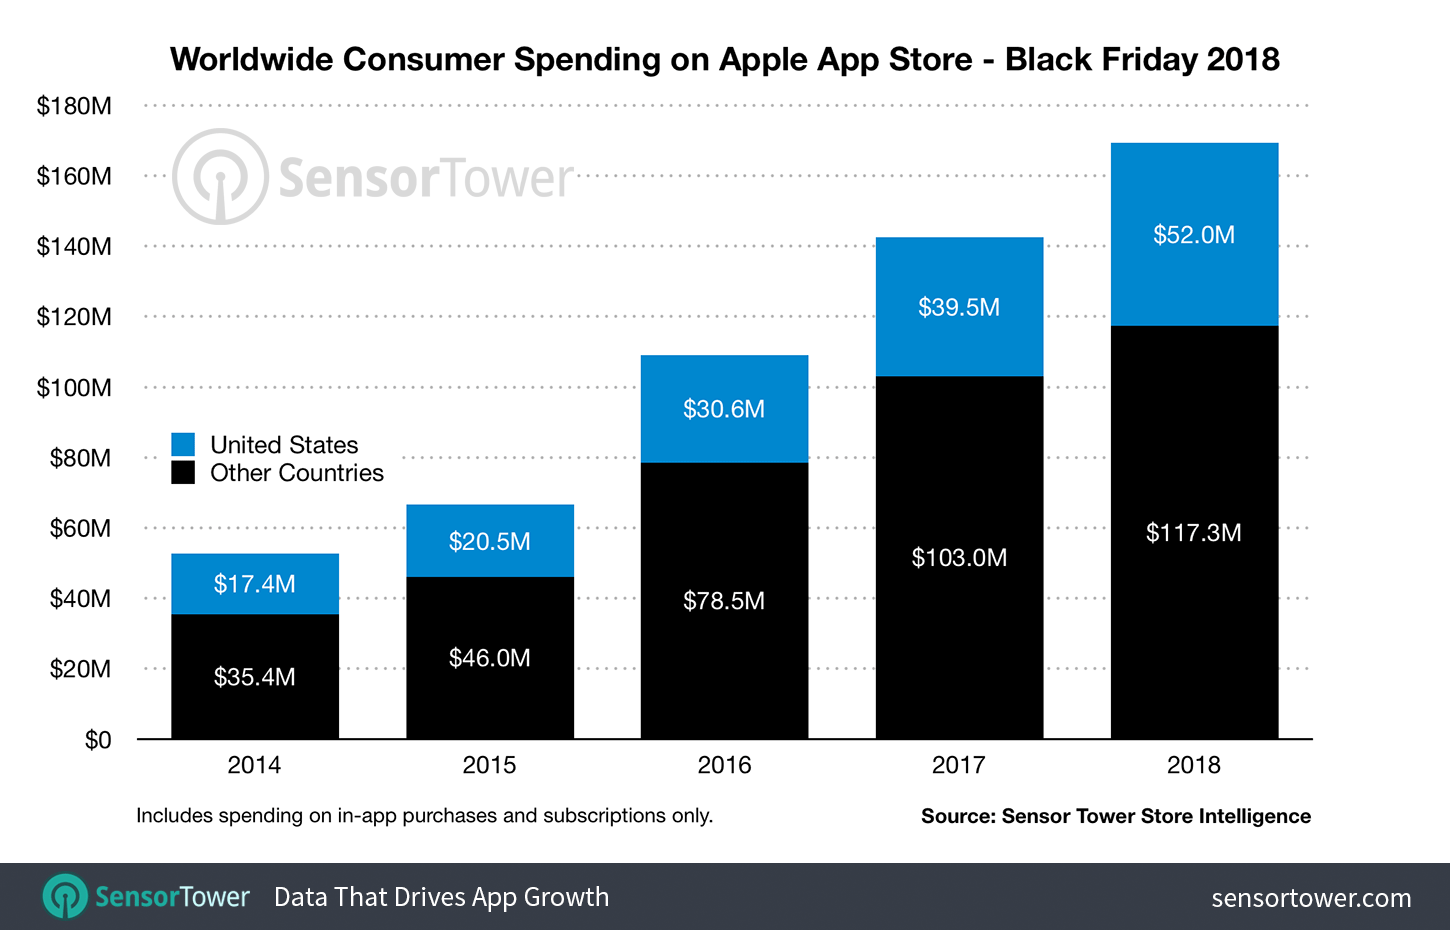 Worldwide and U.S. Black Friday Revenue on the App Store for 2014 through 2018